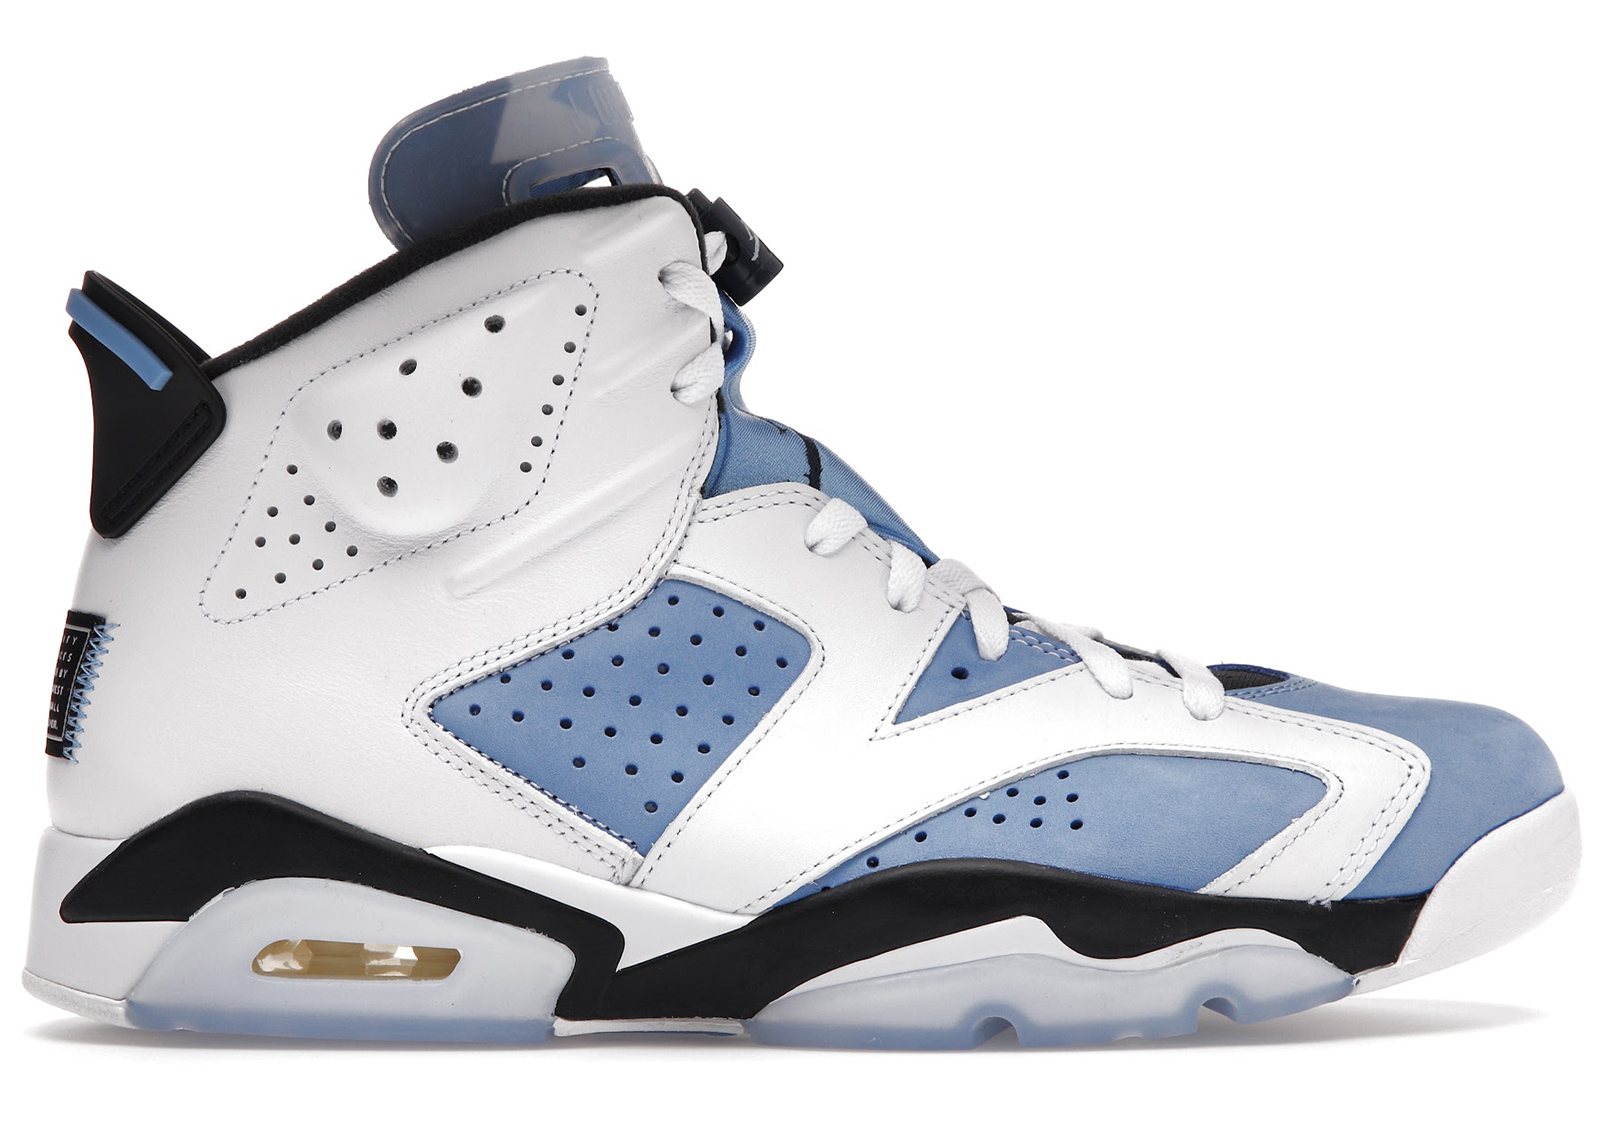 Jordan 6 - All Sizes & Colorways from $69 at StockX